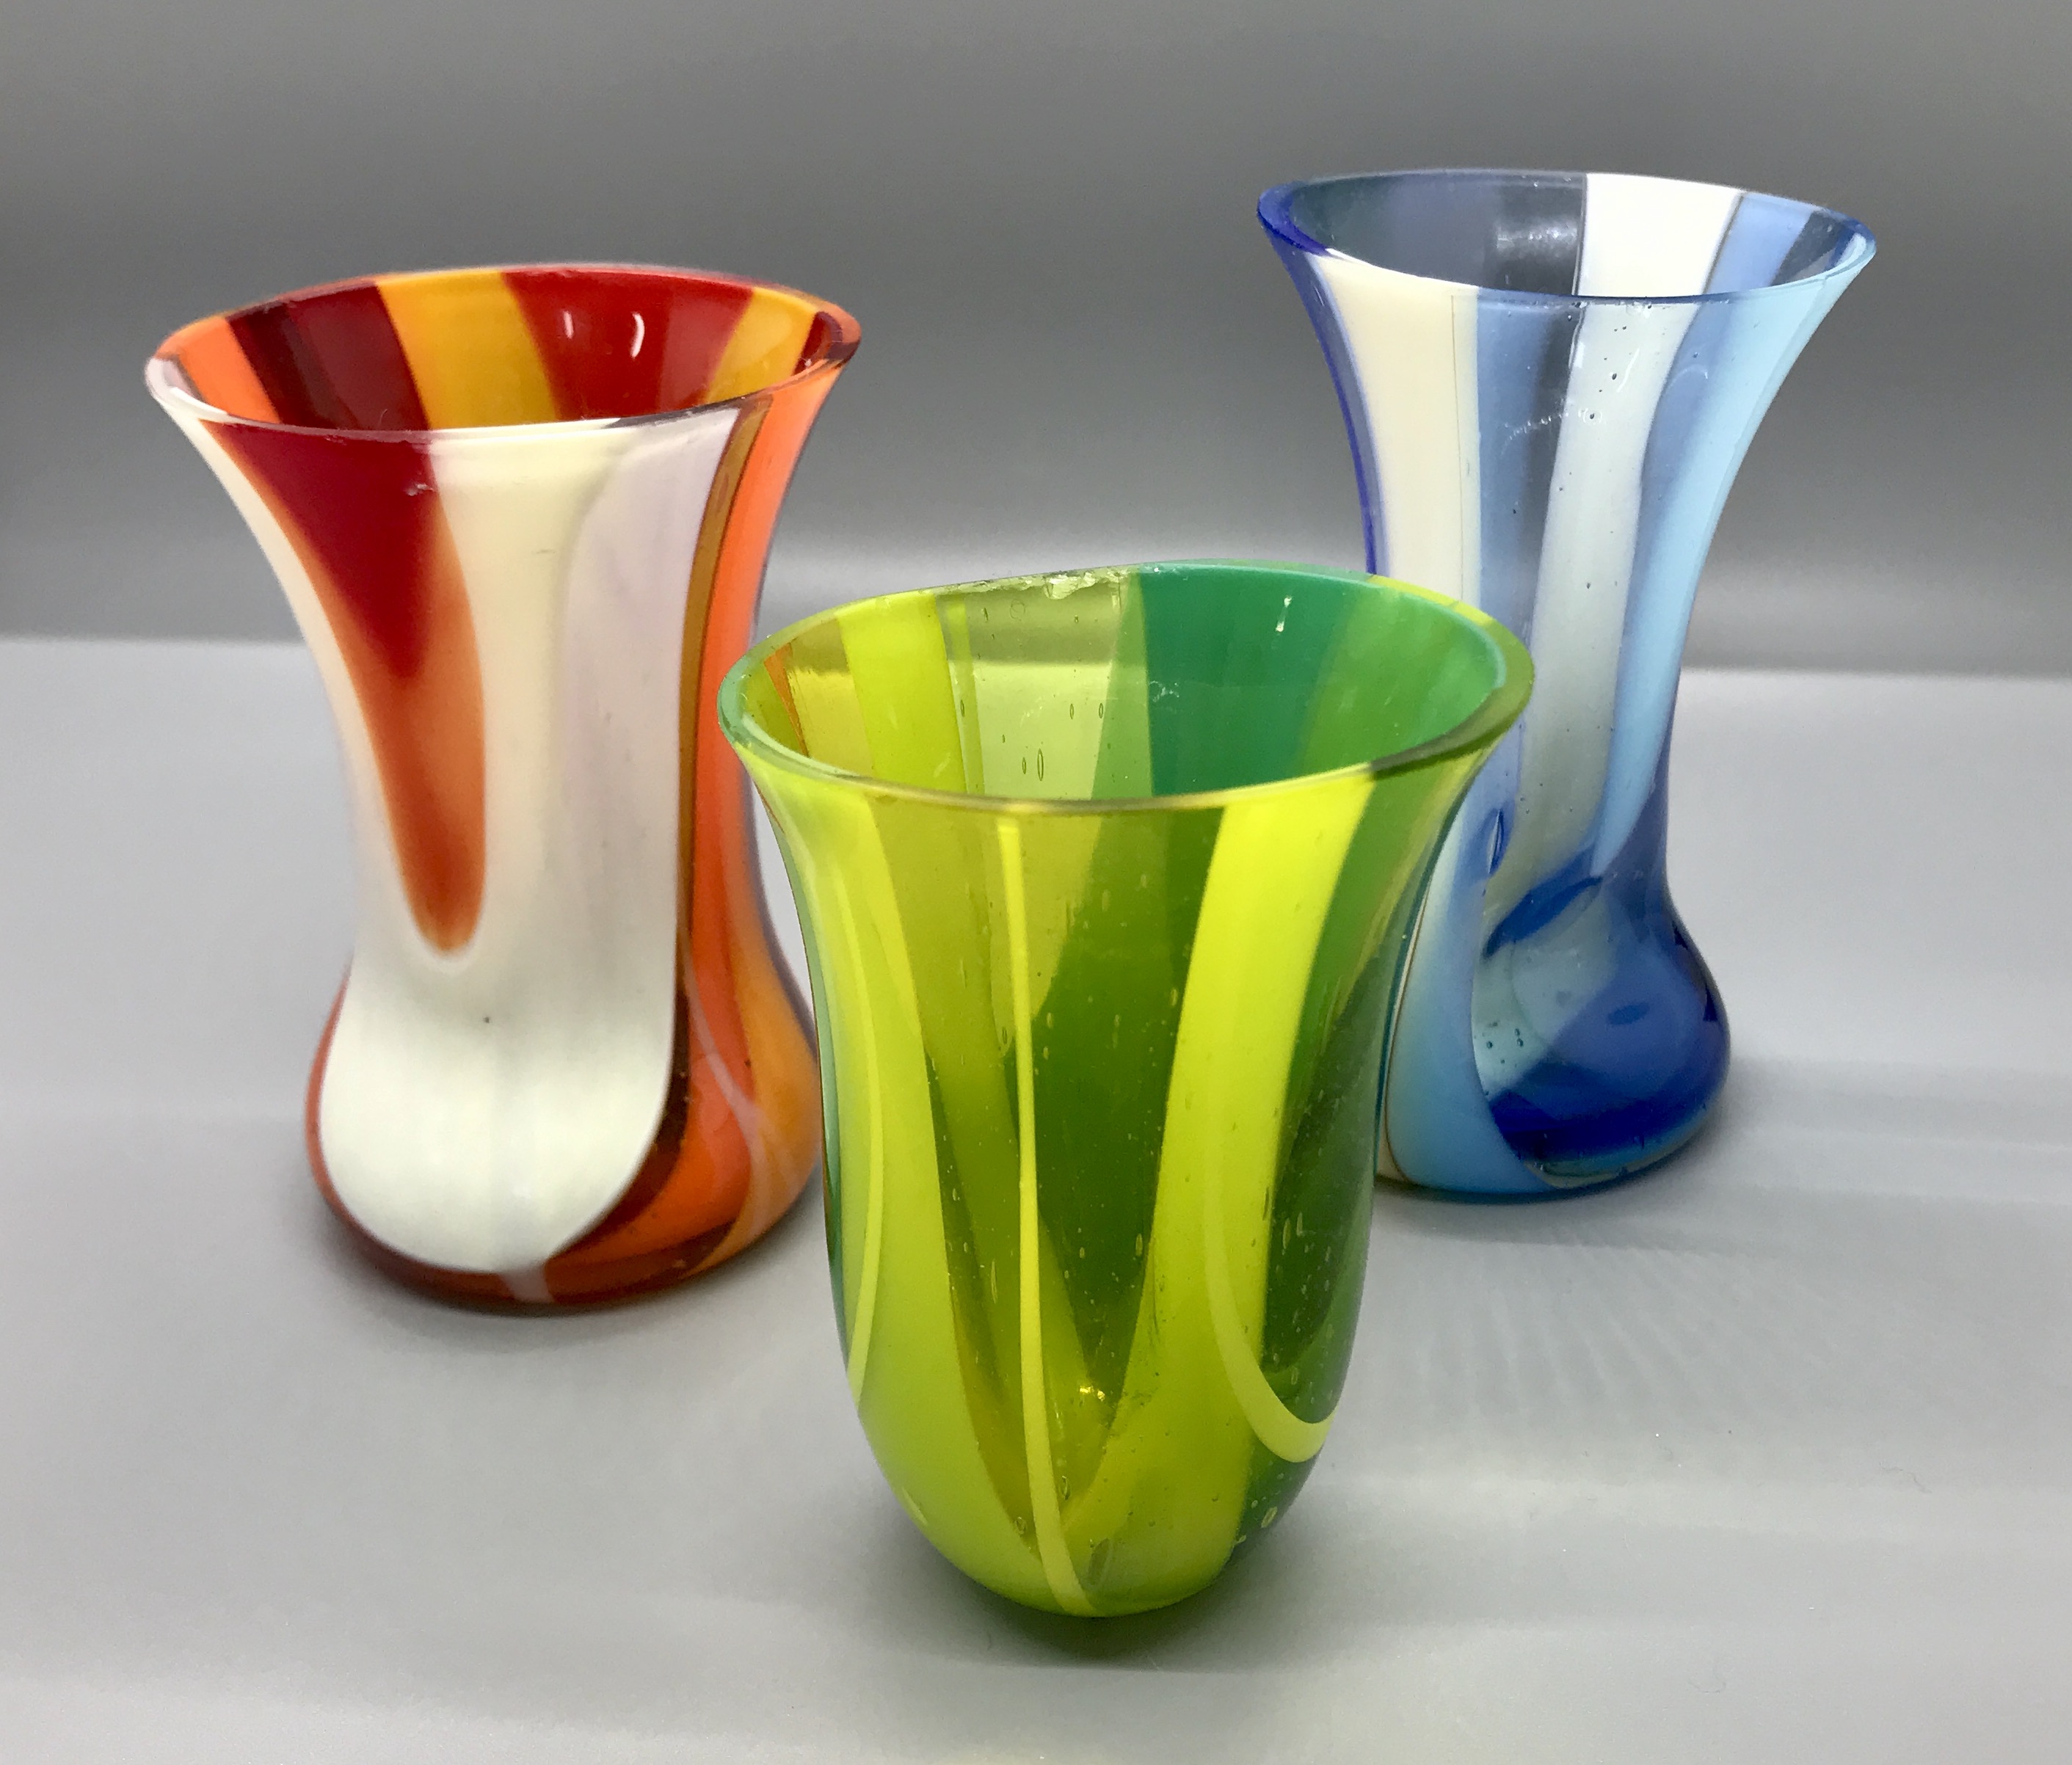 link to the Stretch vases page